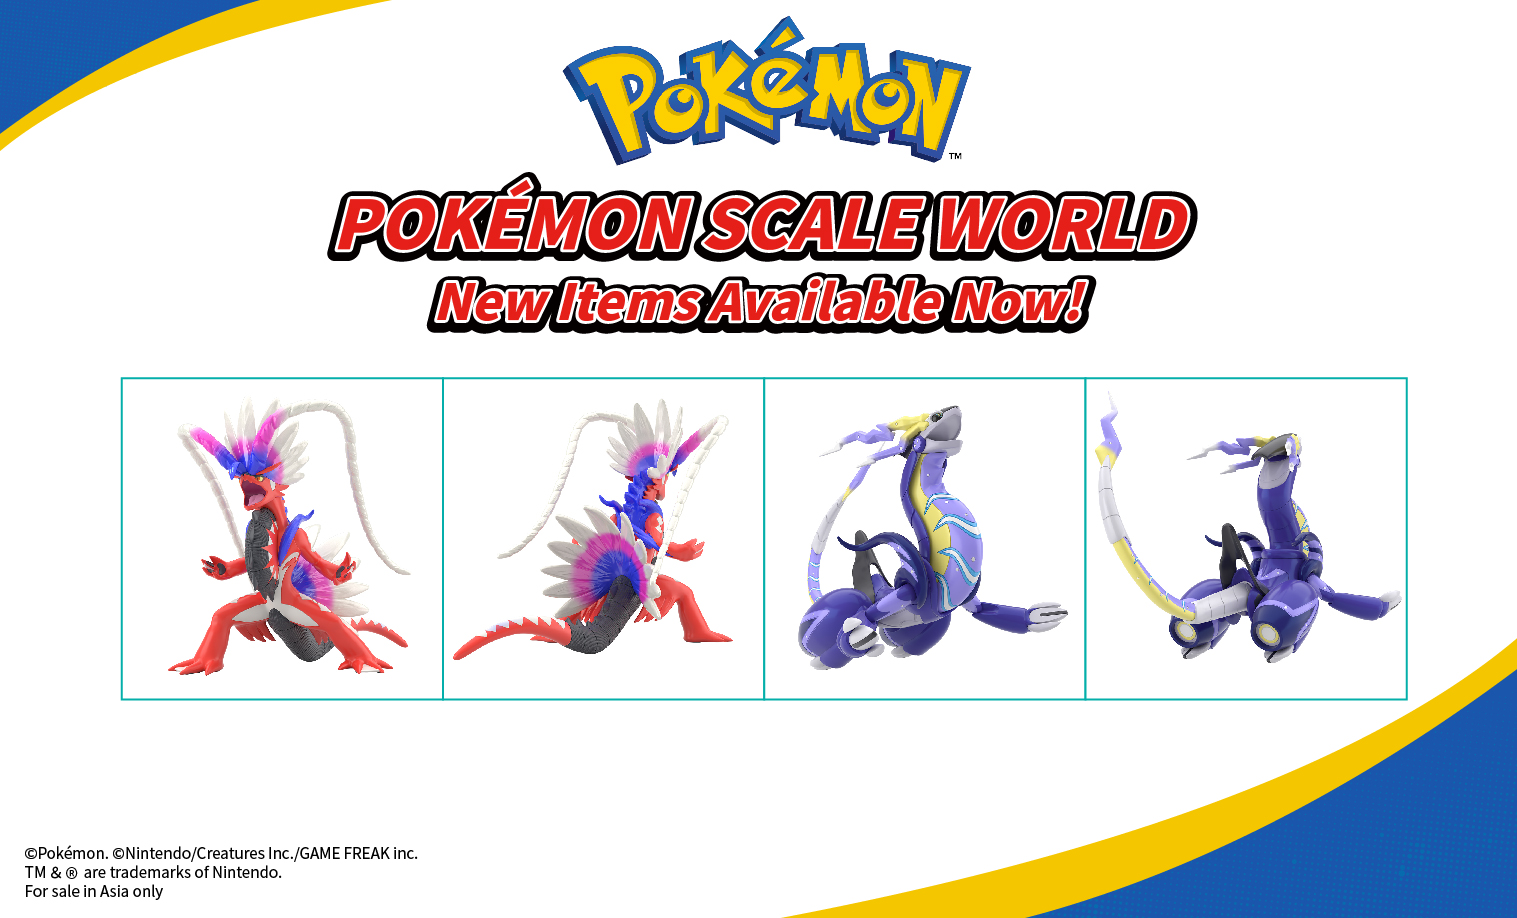 POKÉMON SCALE WORLD New Items Available Now!